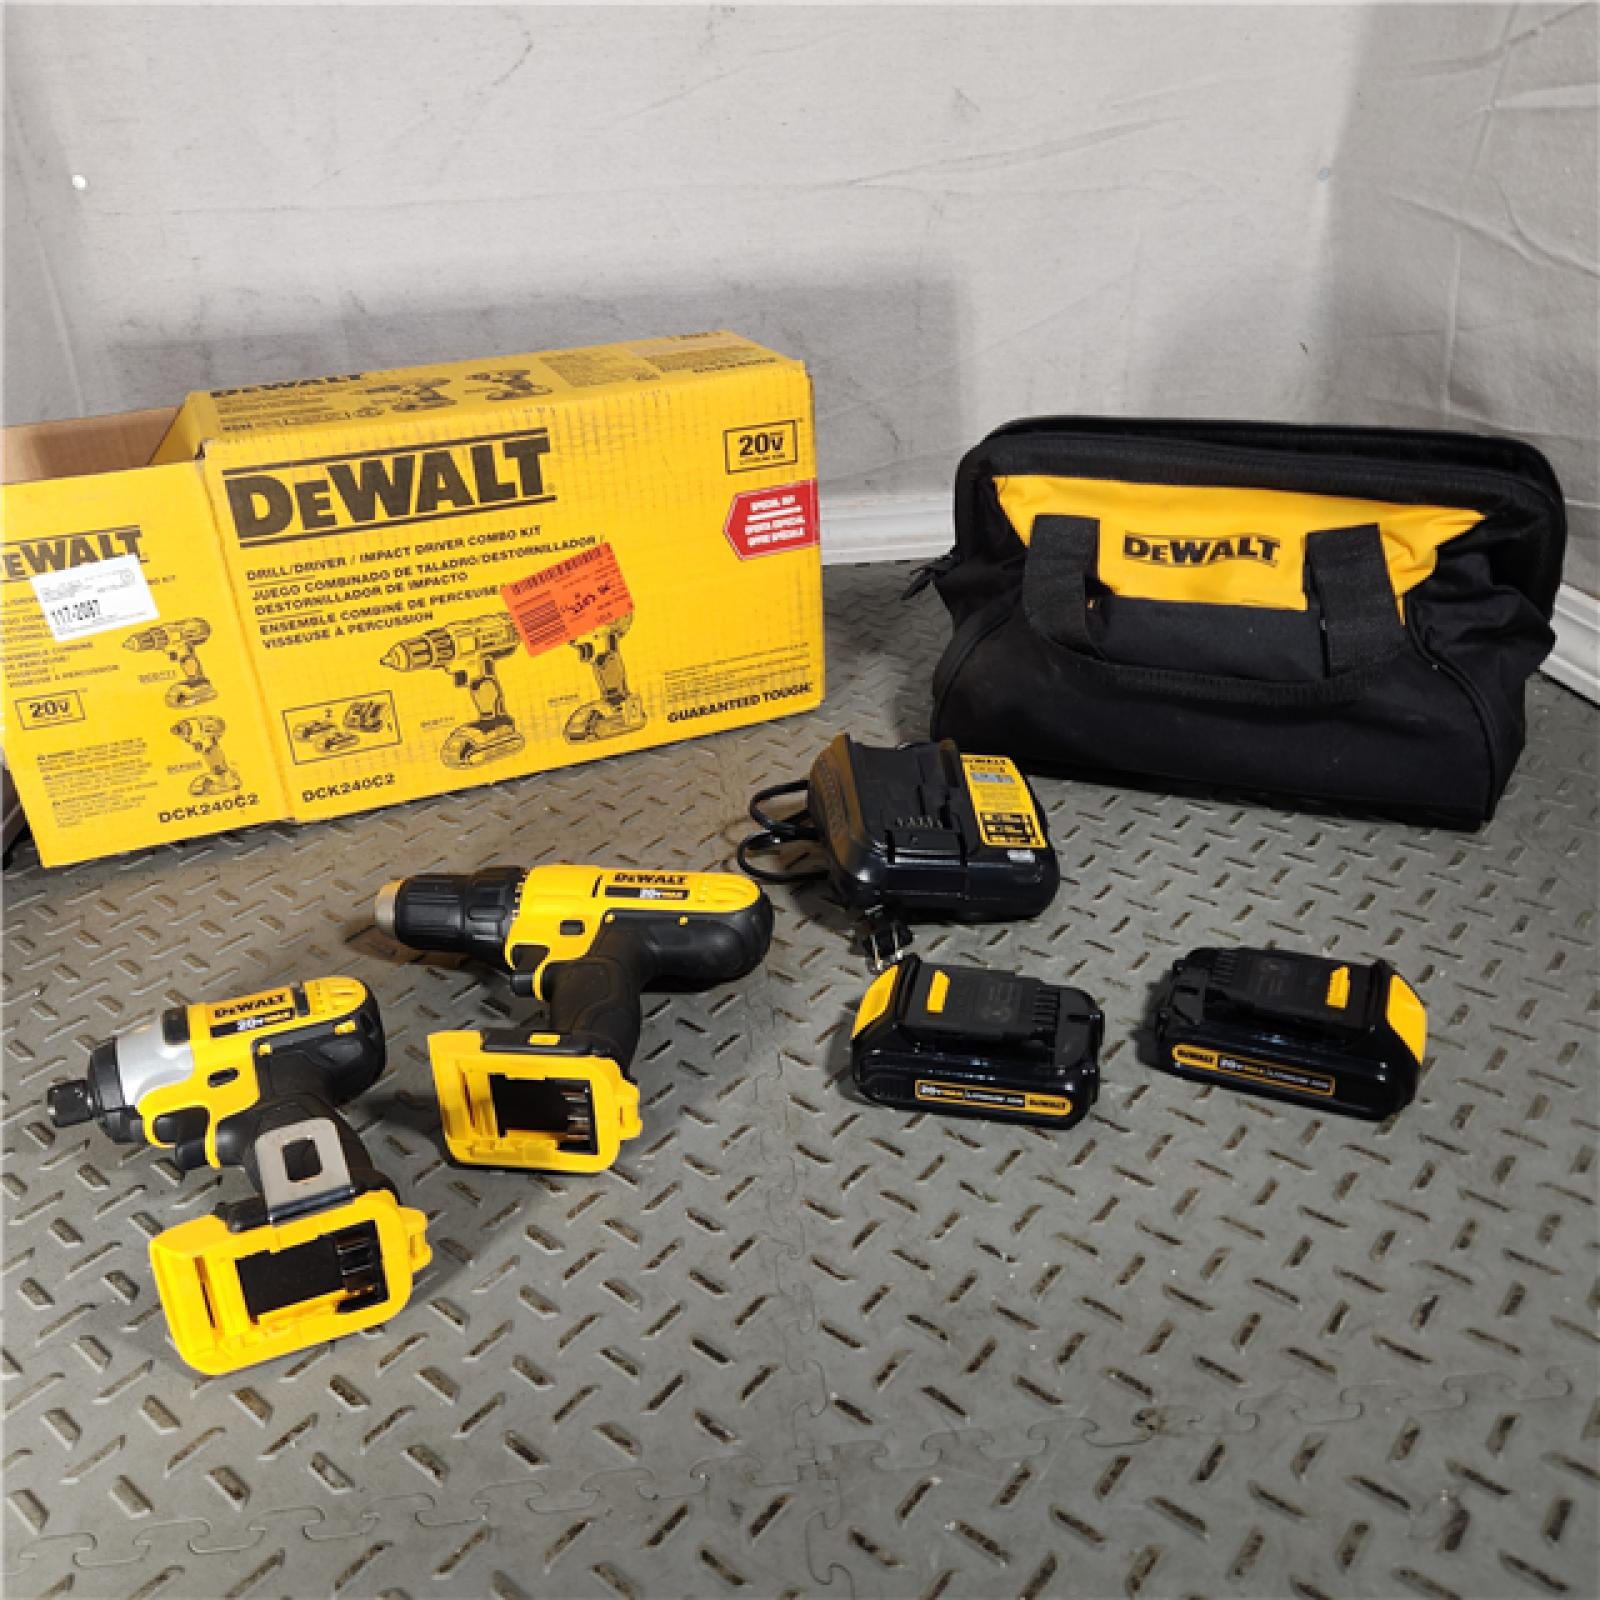 Houston Location - AS-IS DeWalt DCK240C2 20-Volt Max Drill/Driver & Impact Driver Combo Kit  1/2 in.  (2) Batteries - Appears IN GOOD Condition